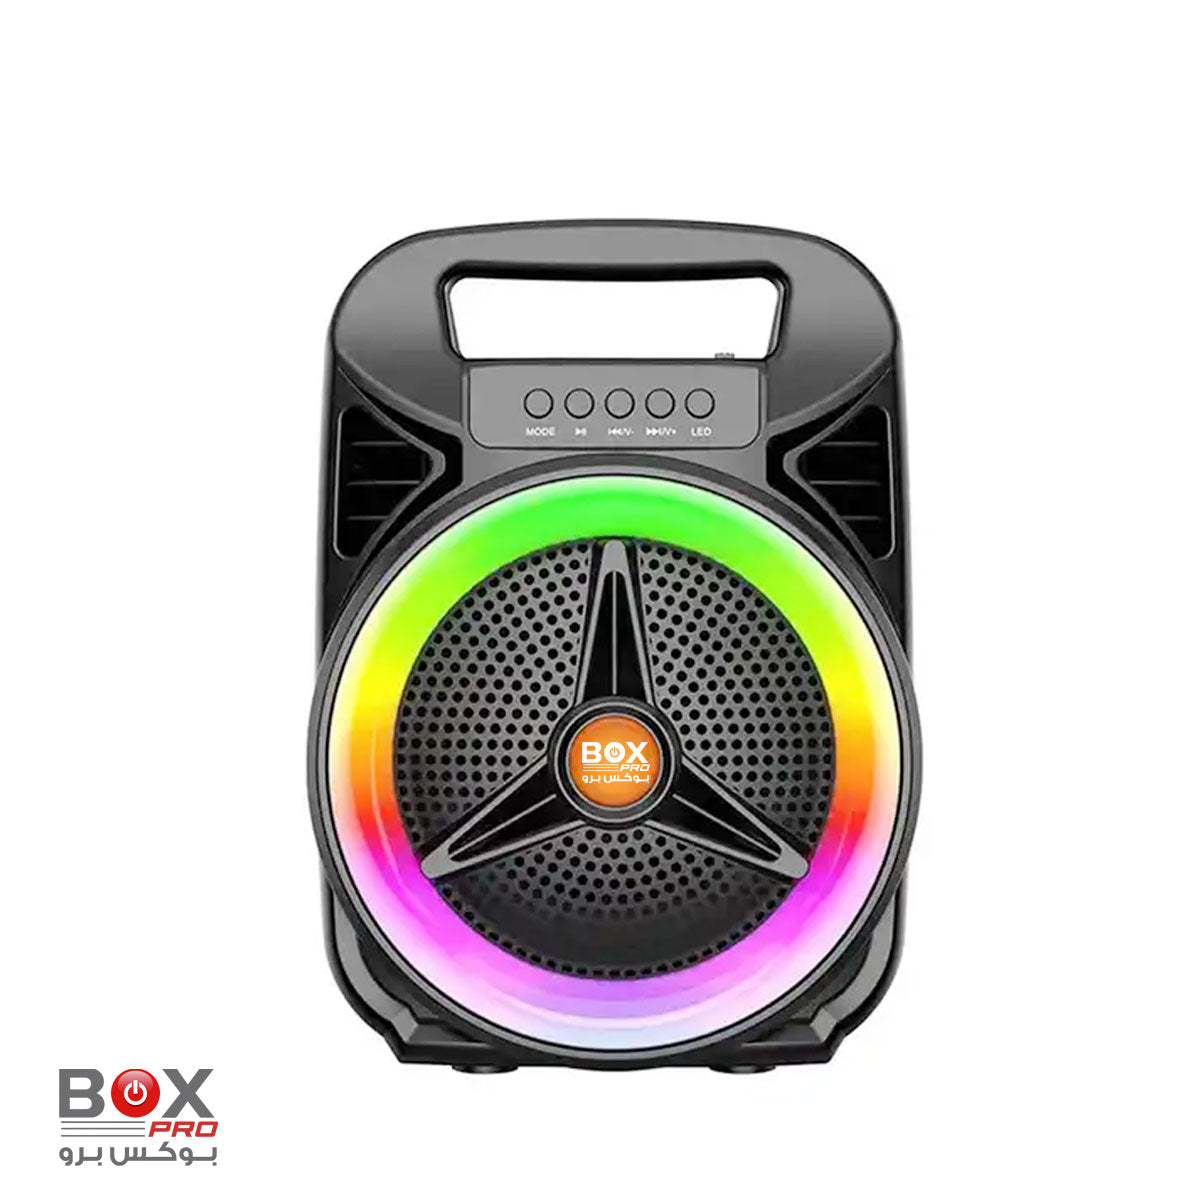 BoxPro 6.5 Inch Portable Sudio System Bluetooth speakers BS03